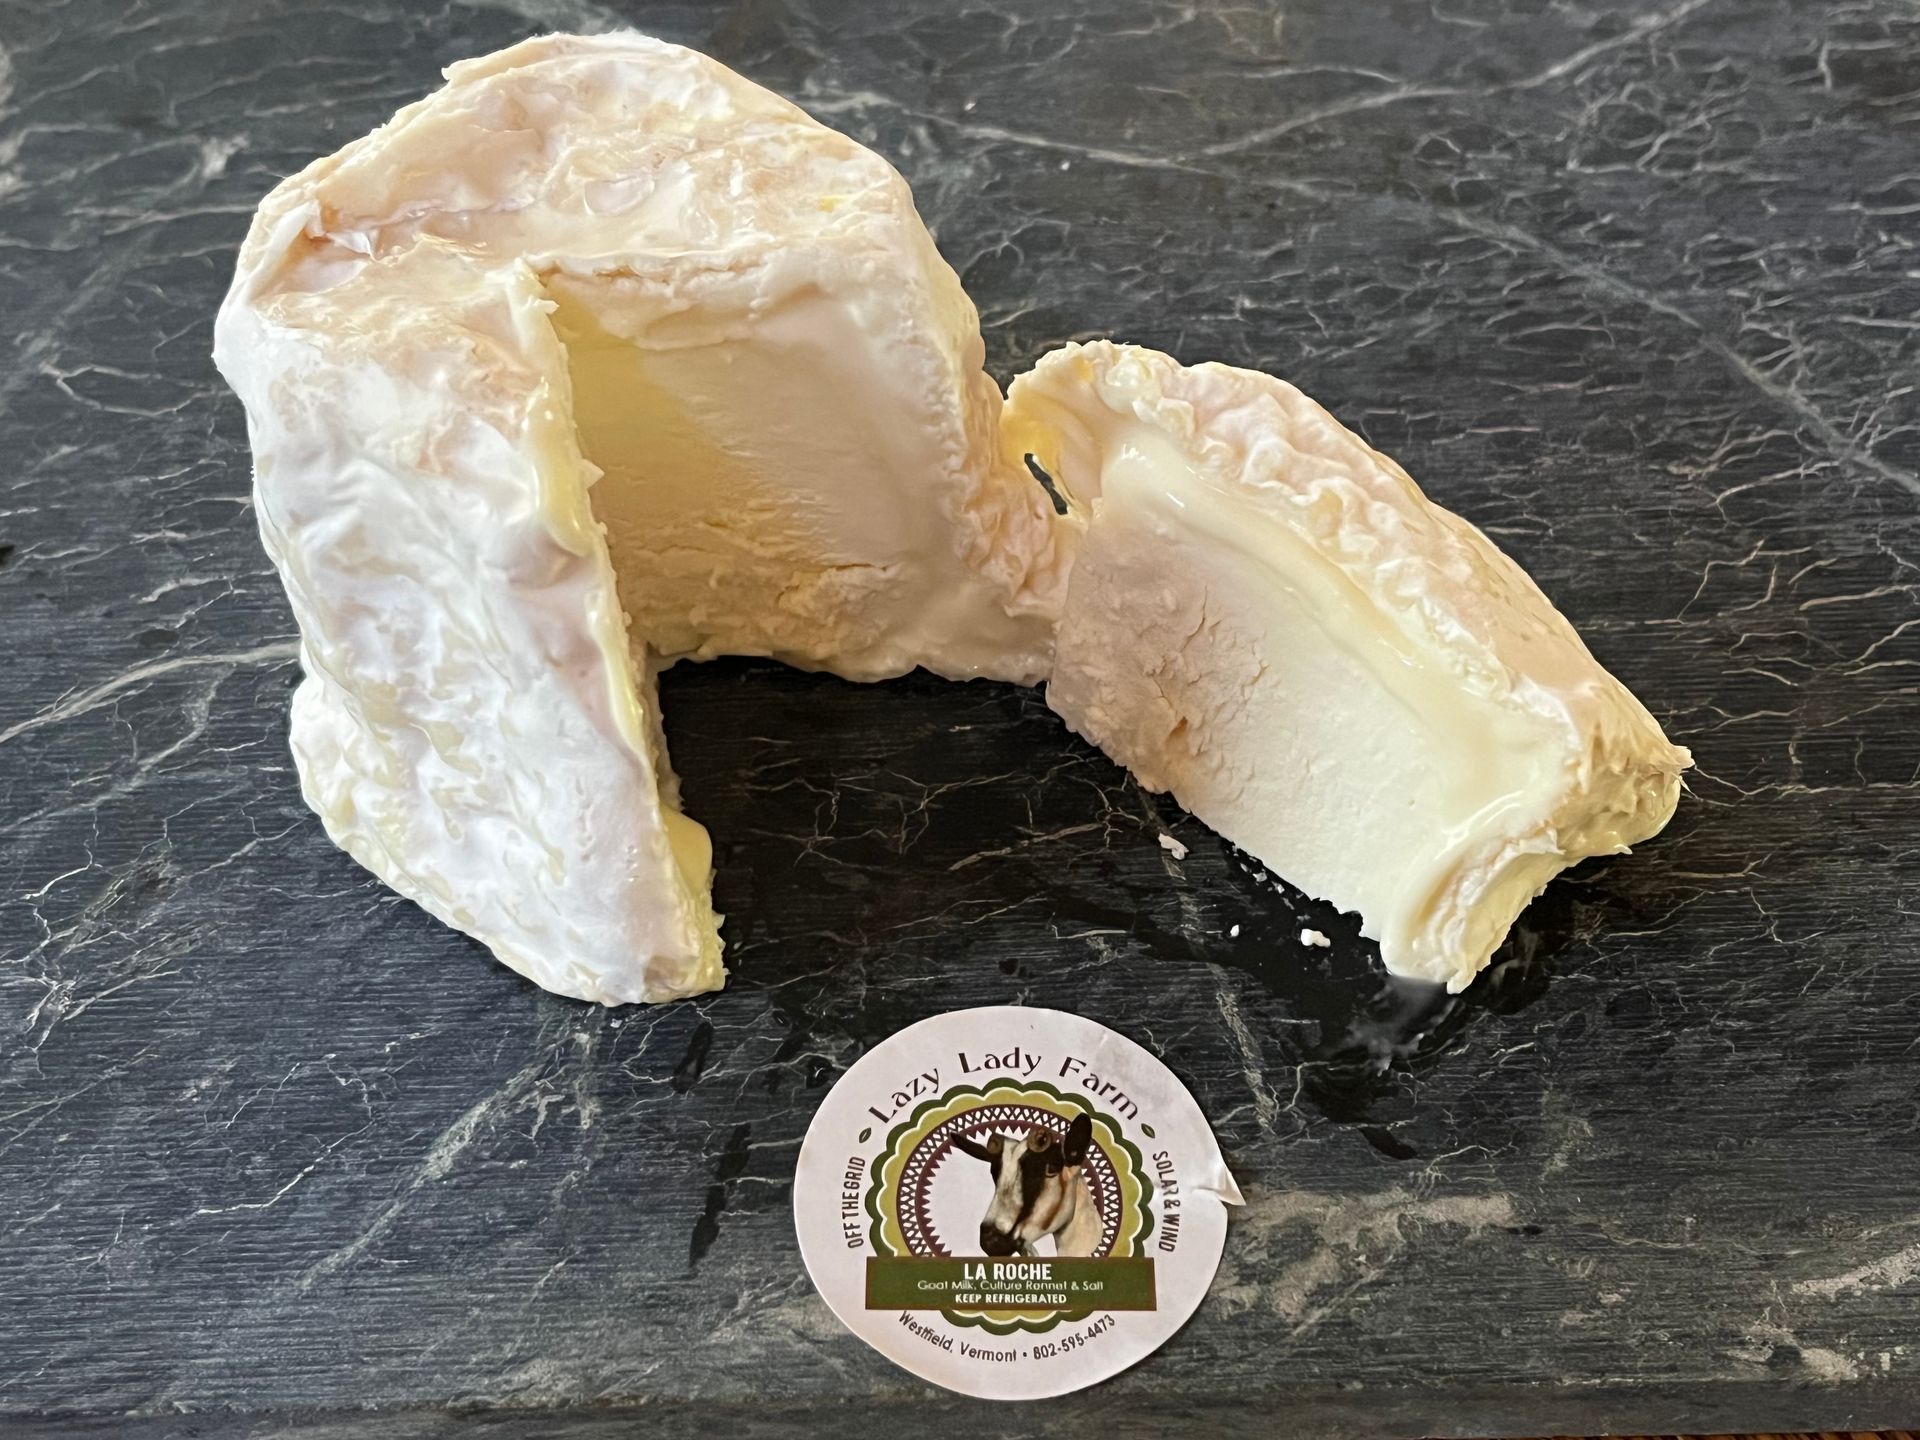 La Roche Goat Cheese available at The Wine & Cheese Depot in Ludlow, Vermont